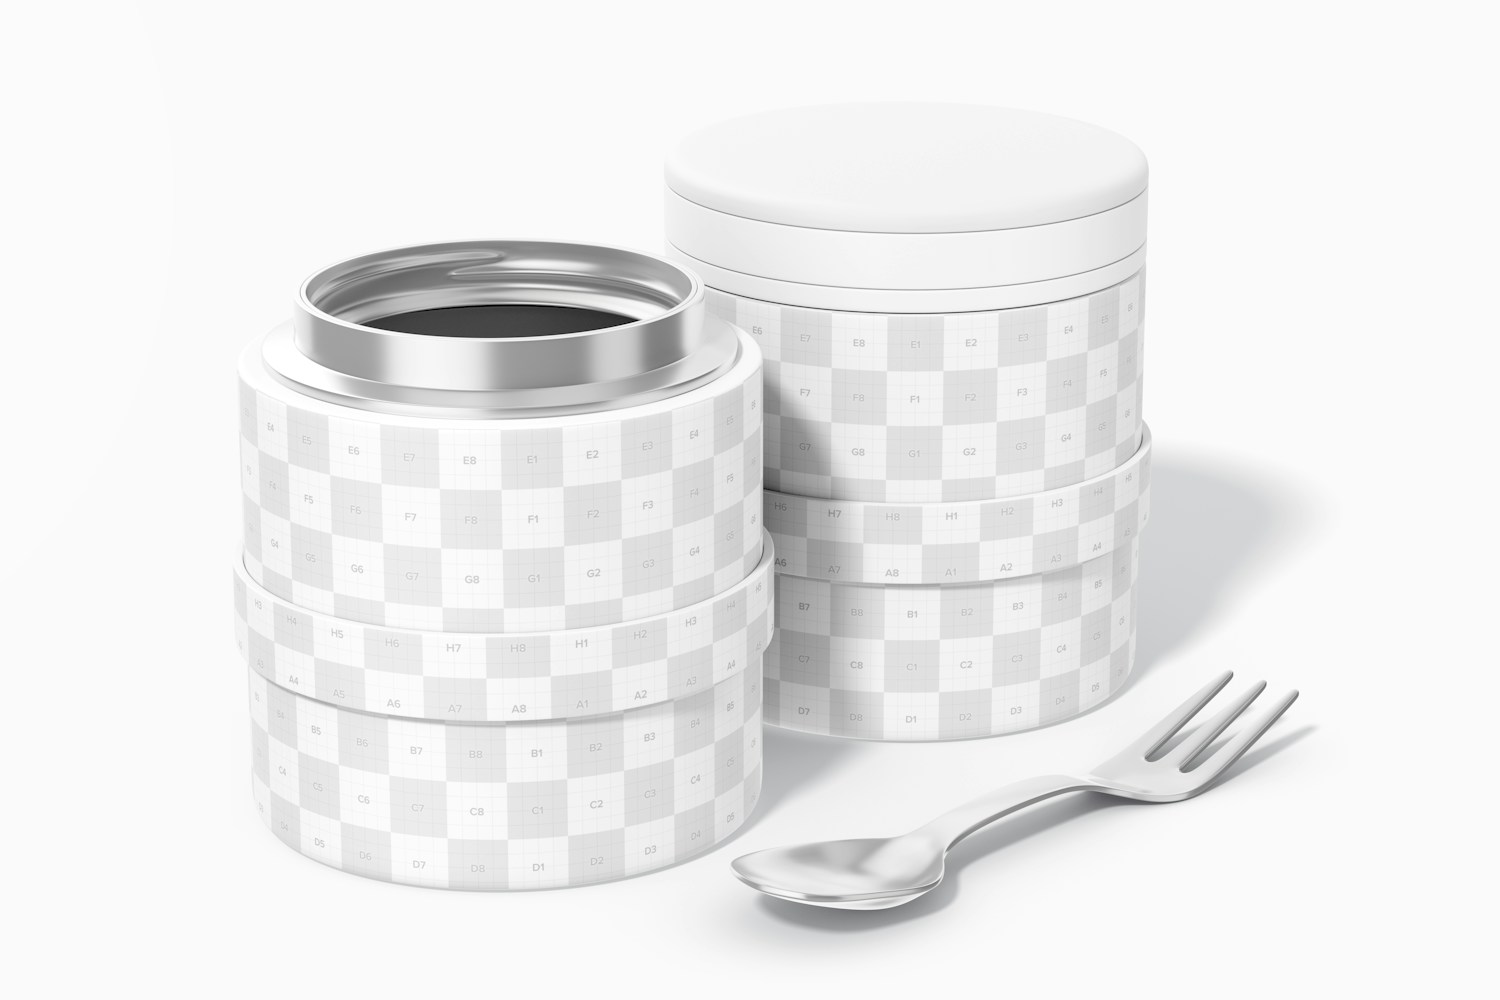 Plastic Food Container with Lid Mockup, Perspective